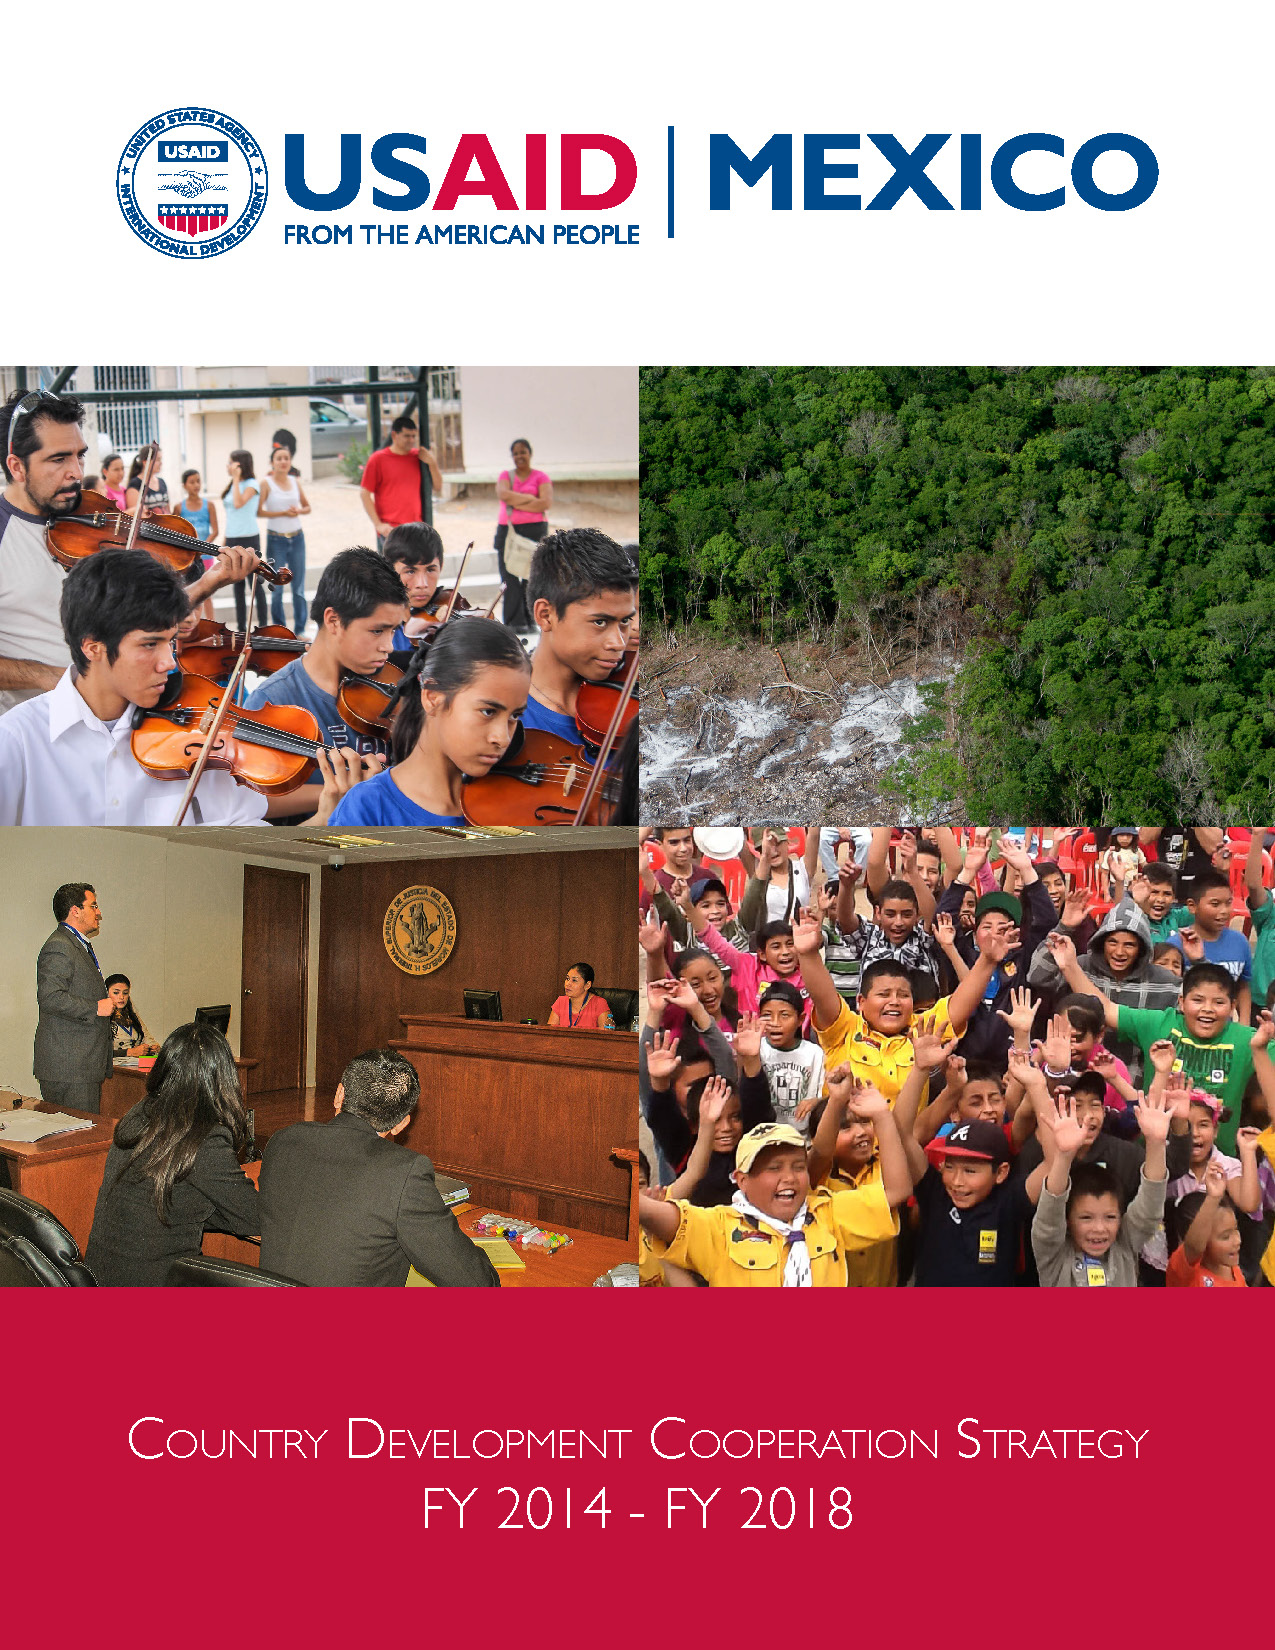 USAID/Mexico Country Development Cooperation Strategy 2014-2018